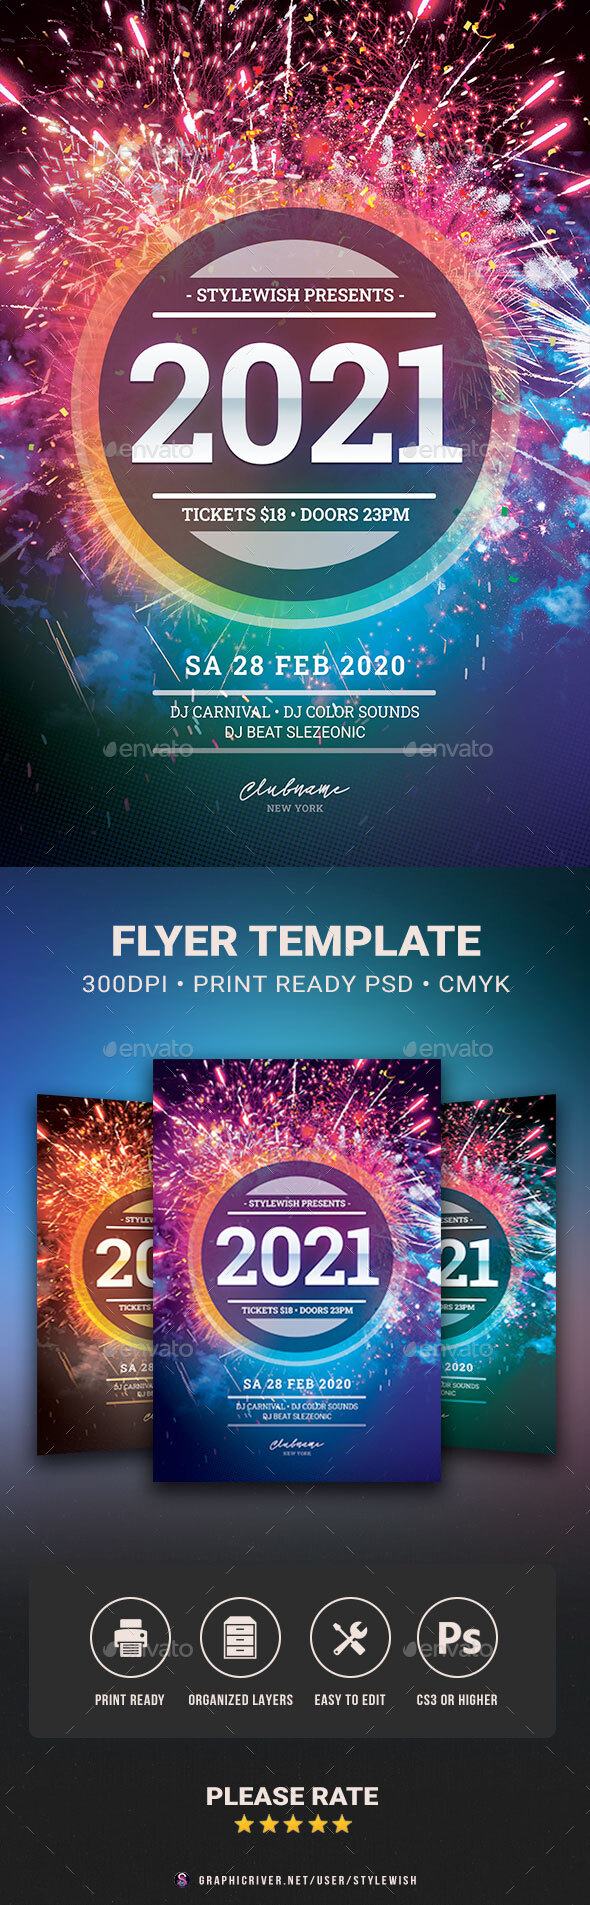 [DOWNLOAD]New Year Flyer